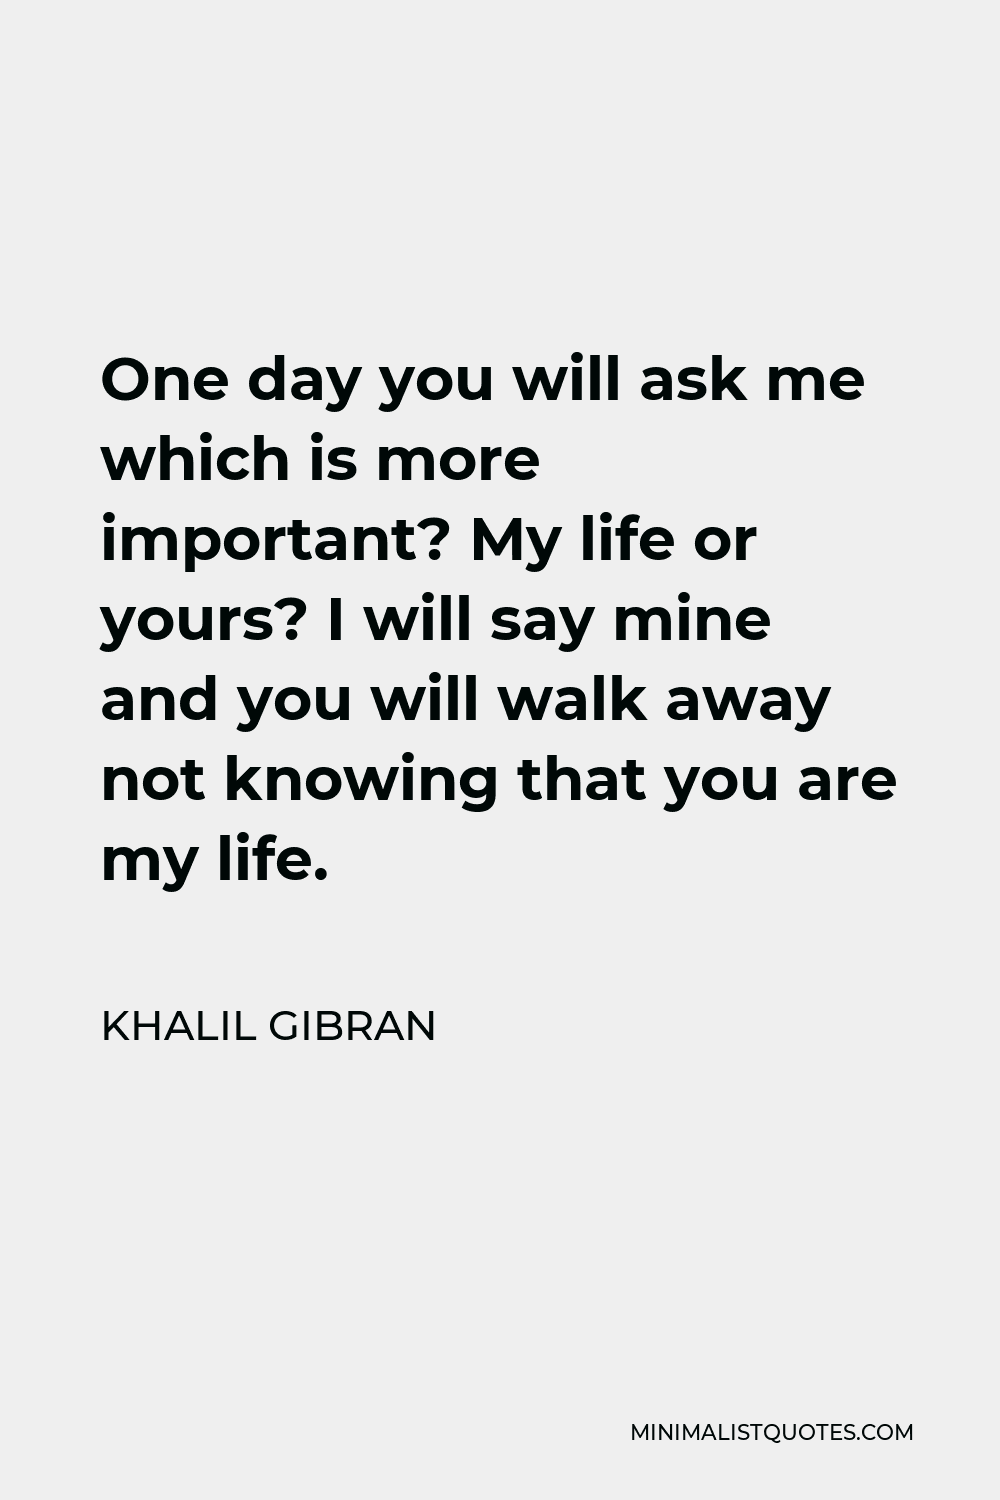 Khalil Gibran Quote - One day you will ask me which is more important? My life or yours? I will say mine and you will walk away not knowing that you are my life.